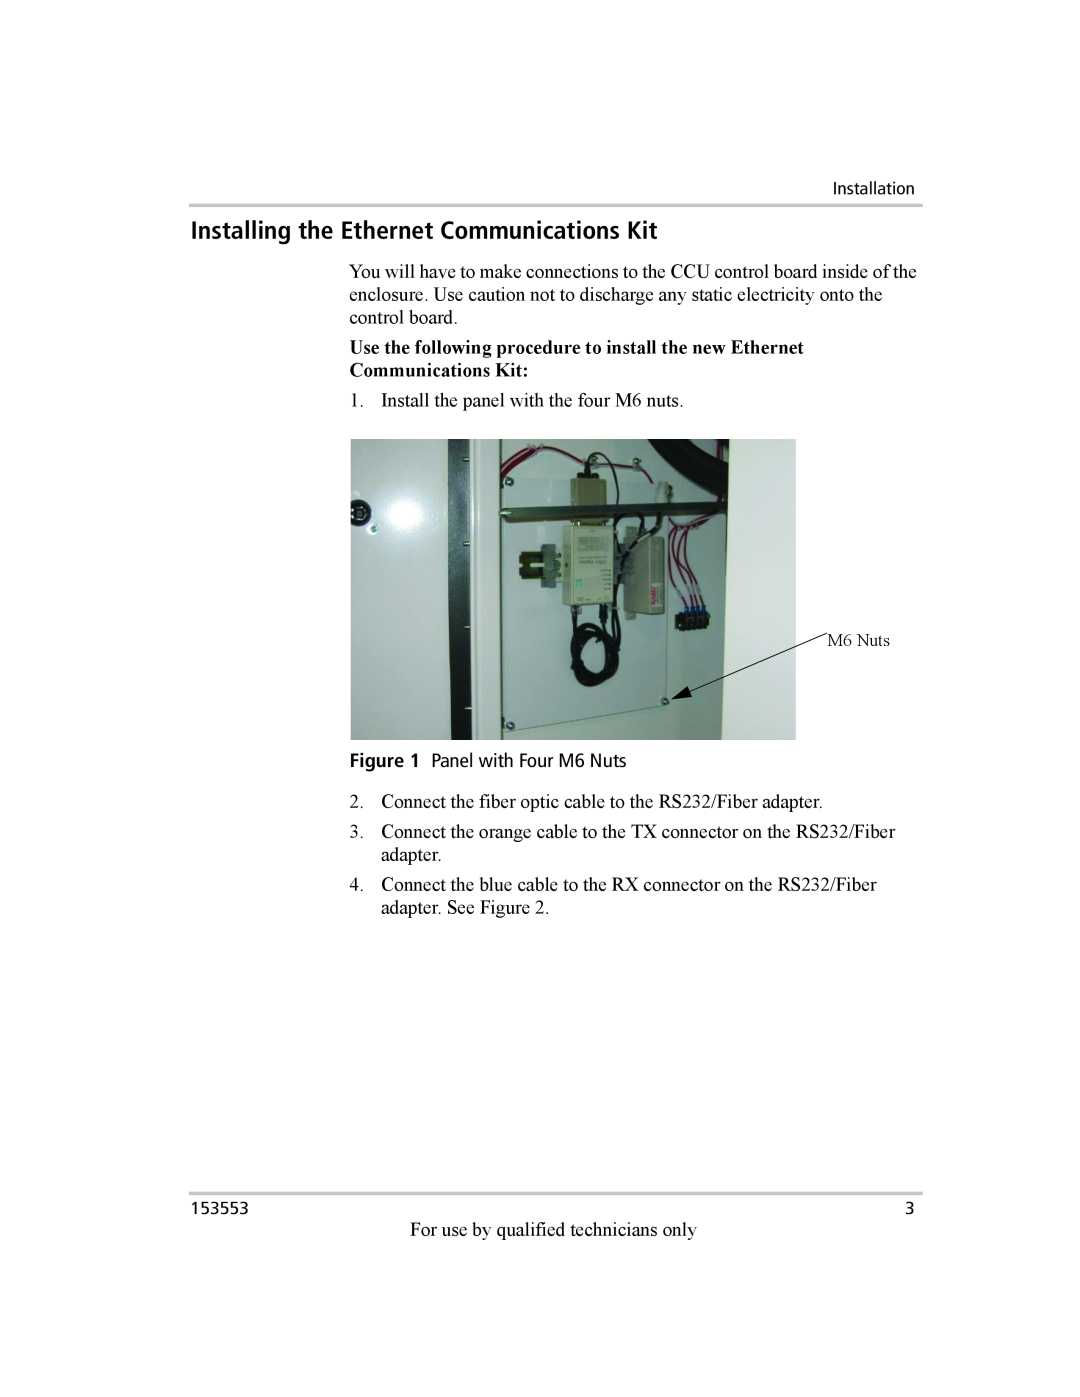 Xantrex Technology GT Series manual Installing the Ethernet Communications Kit 